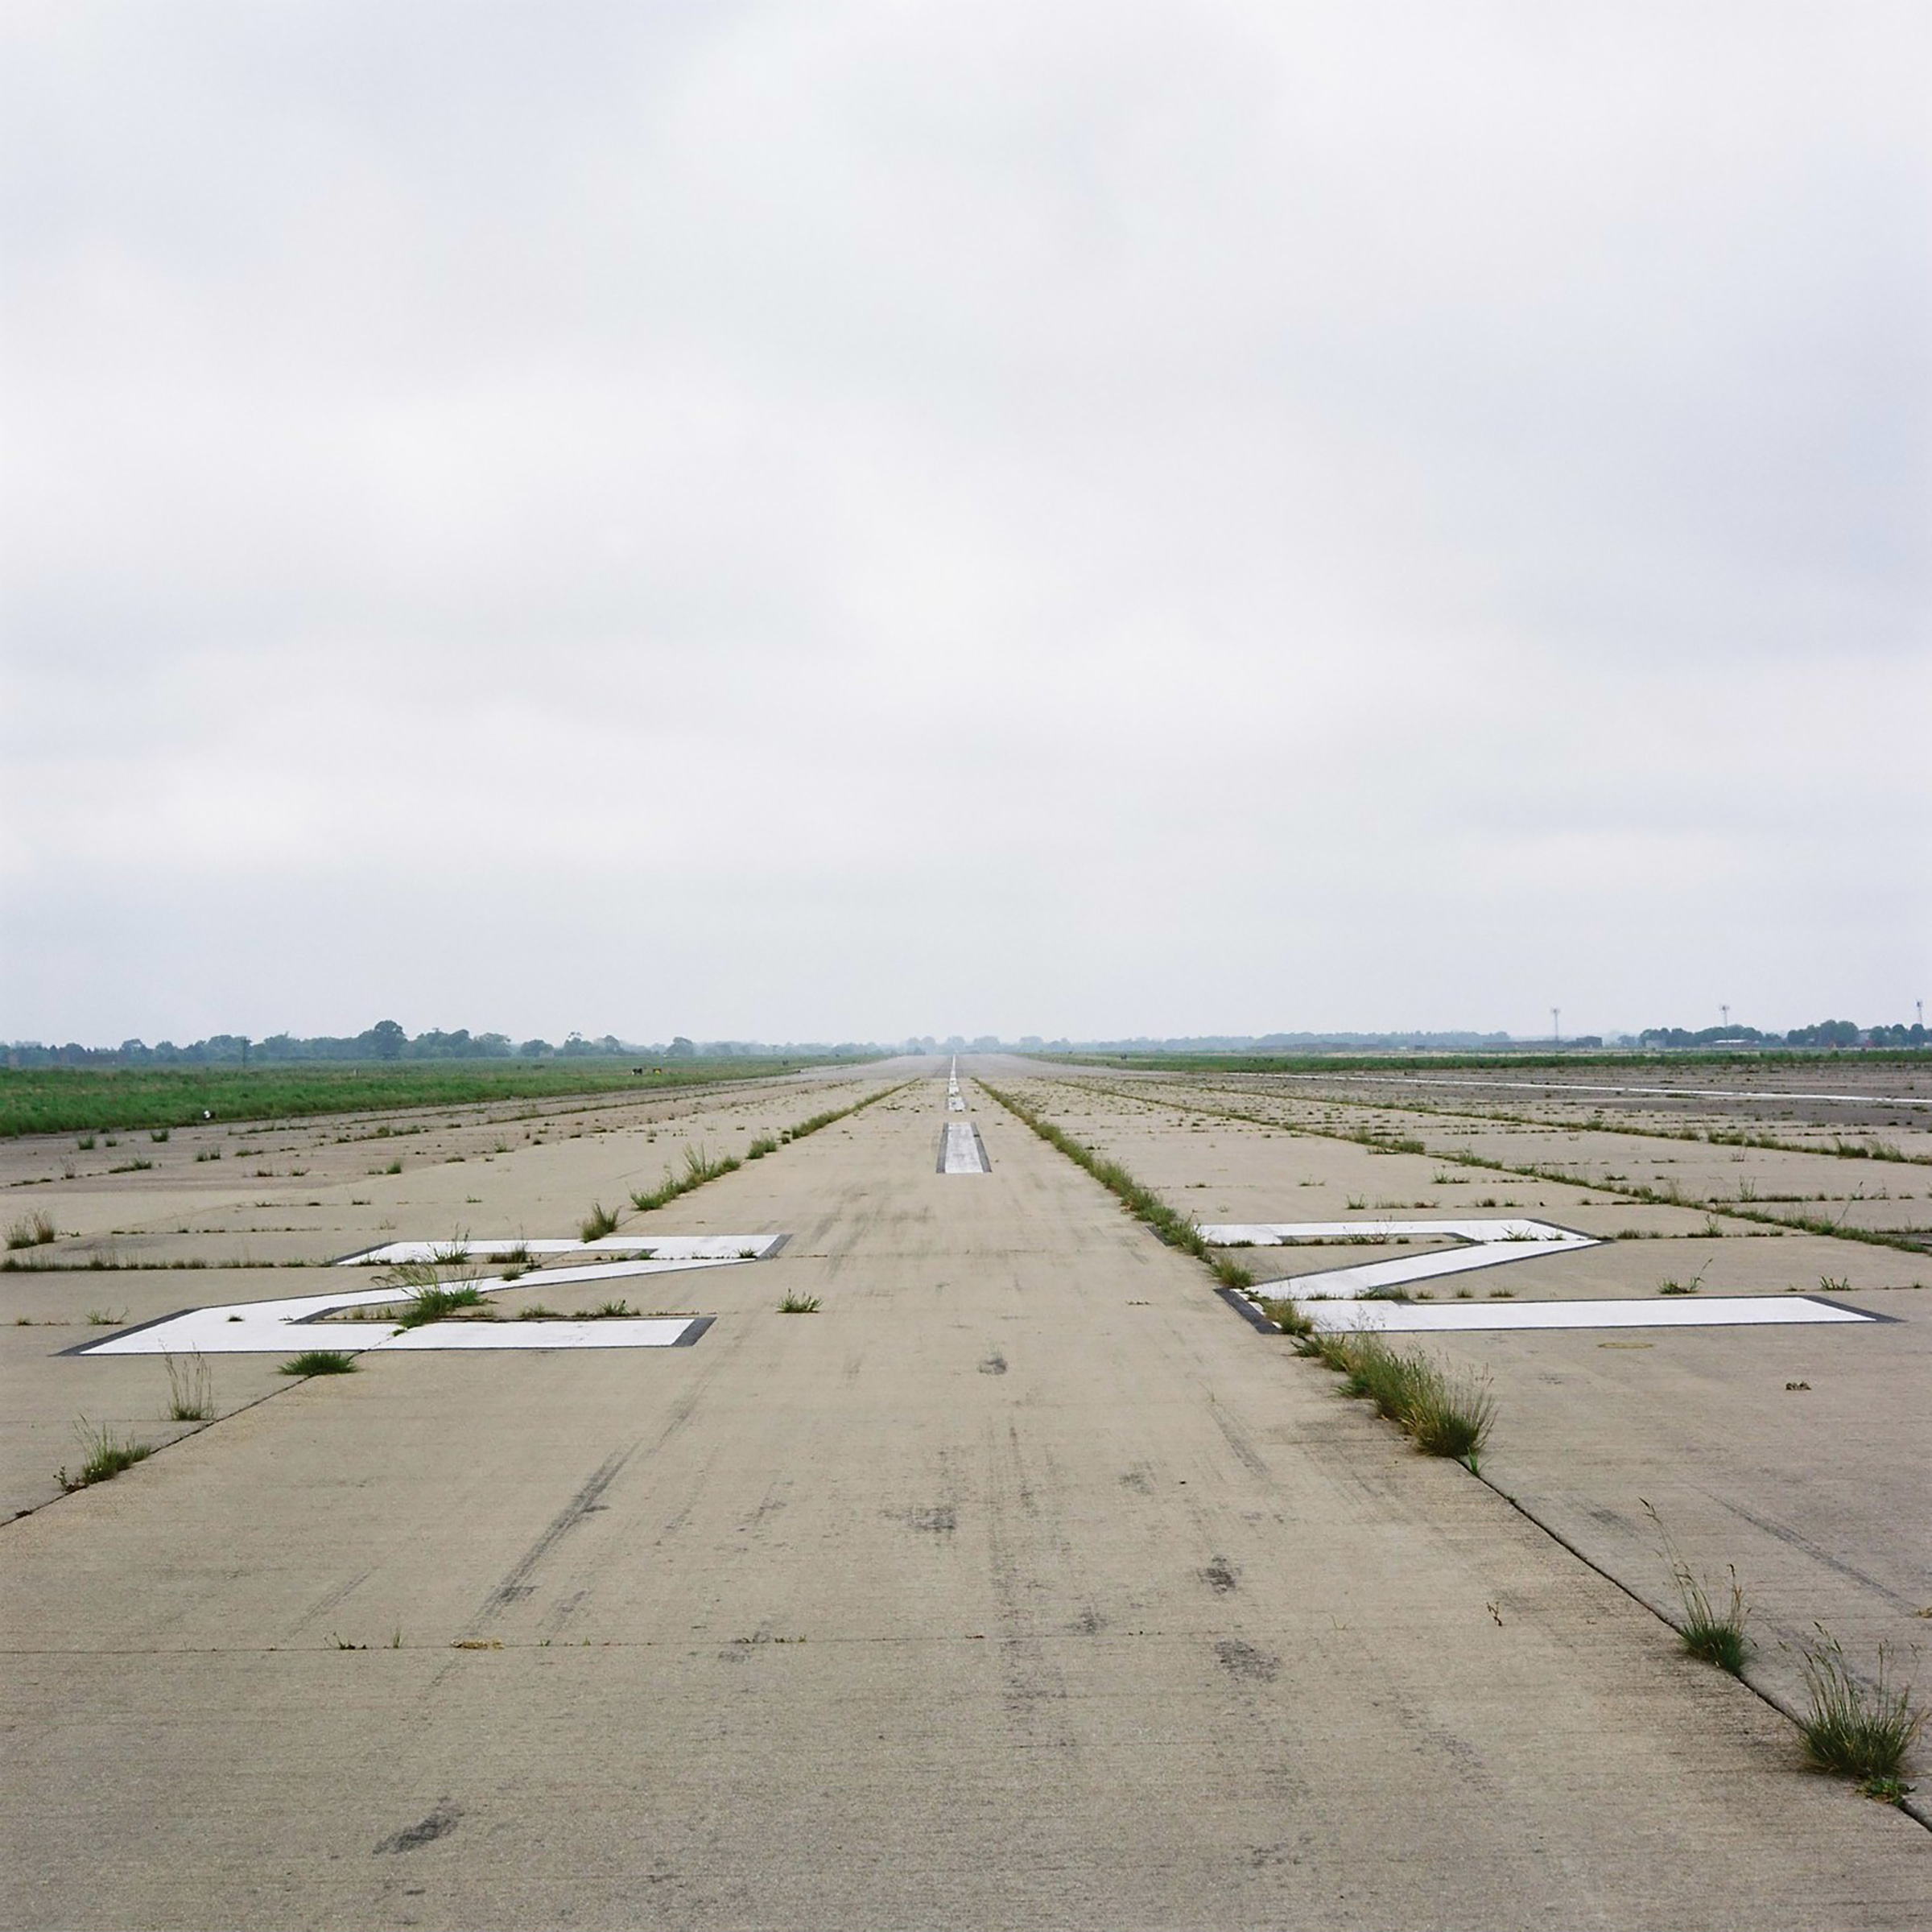 Grass grows between the concrete slabs on the runway which fades into vanishing point under a grey cloudy sky